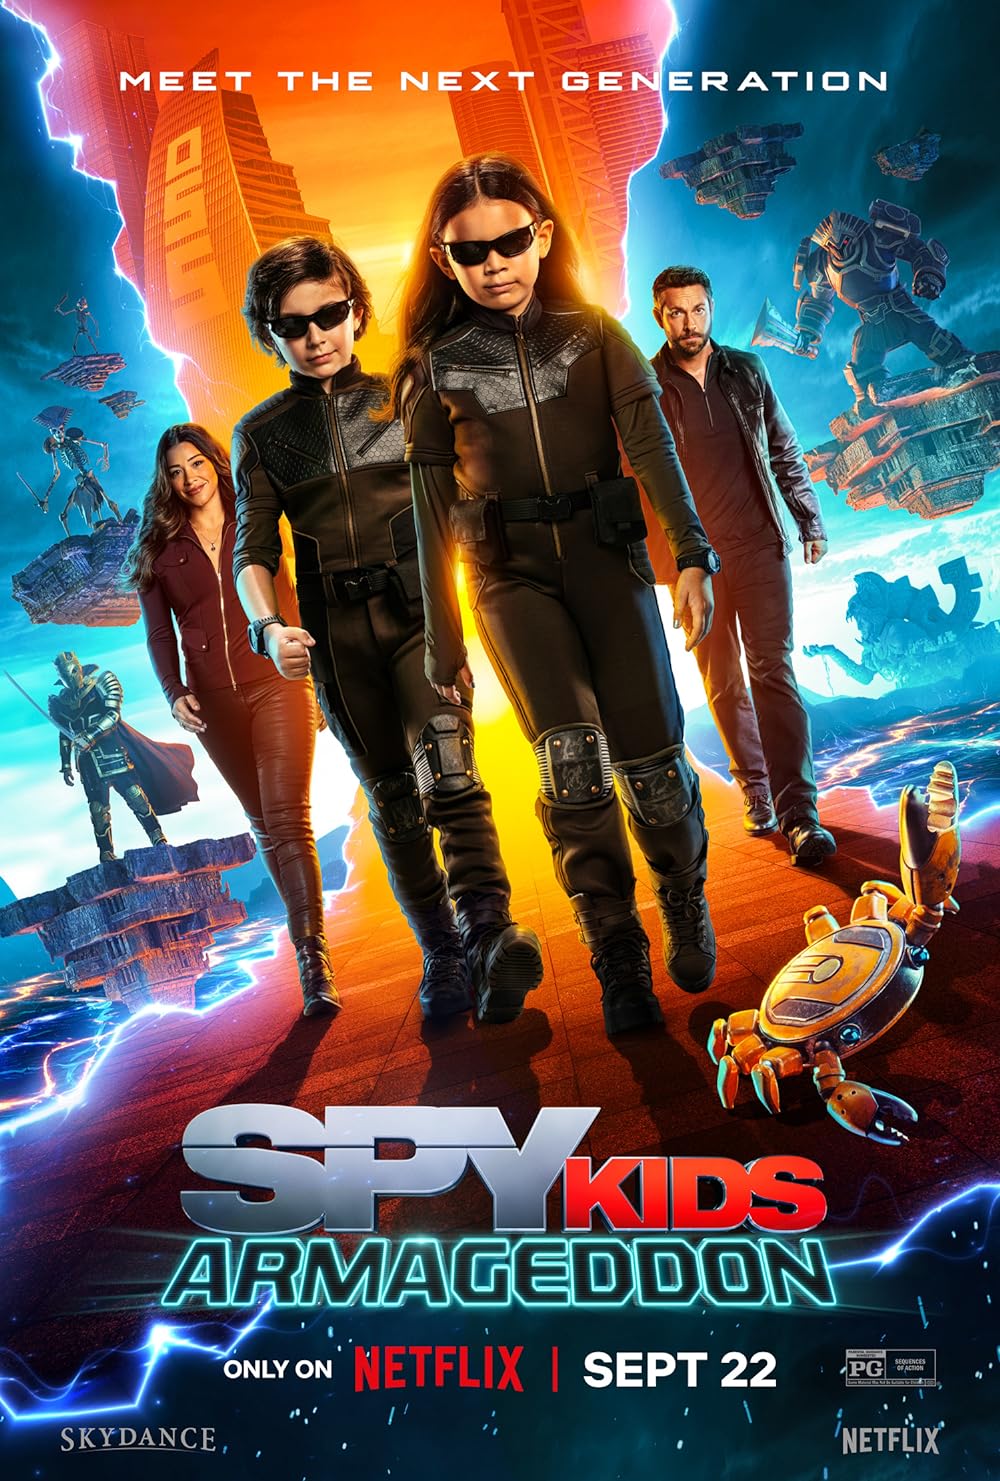 When a powerful game developer threatens to seize control of all technology through a malicious computer virus, Patty and Tony must step into the world of espionage to save their parents and prevent global chaos. 